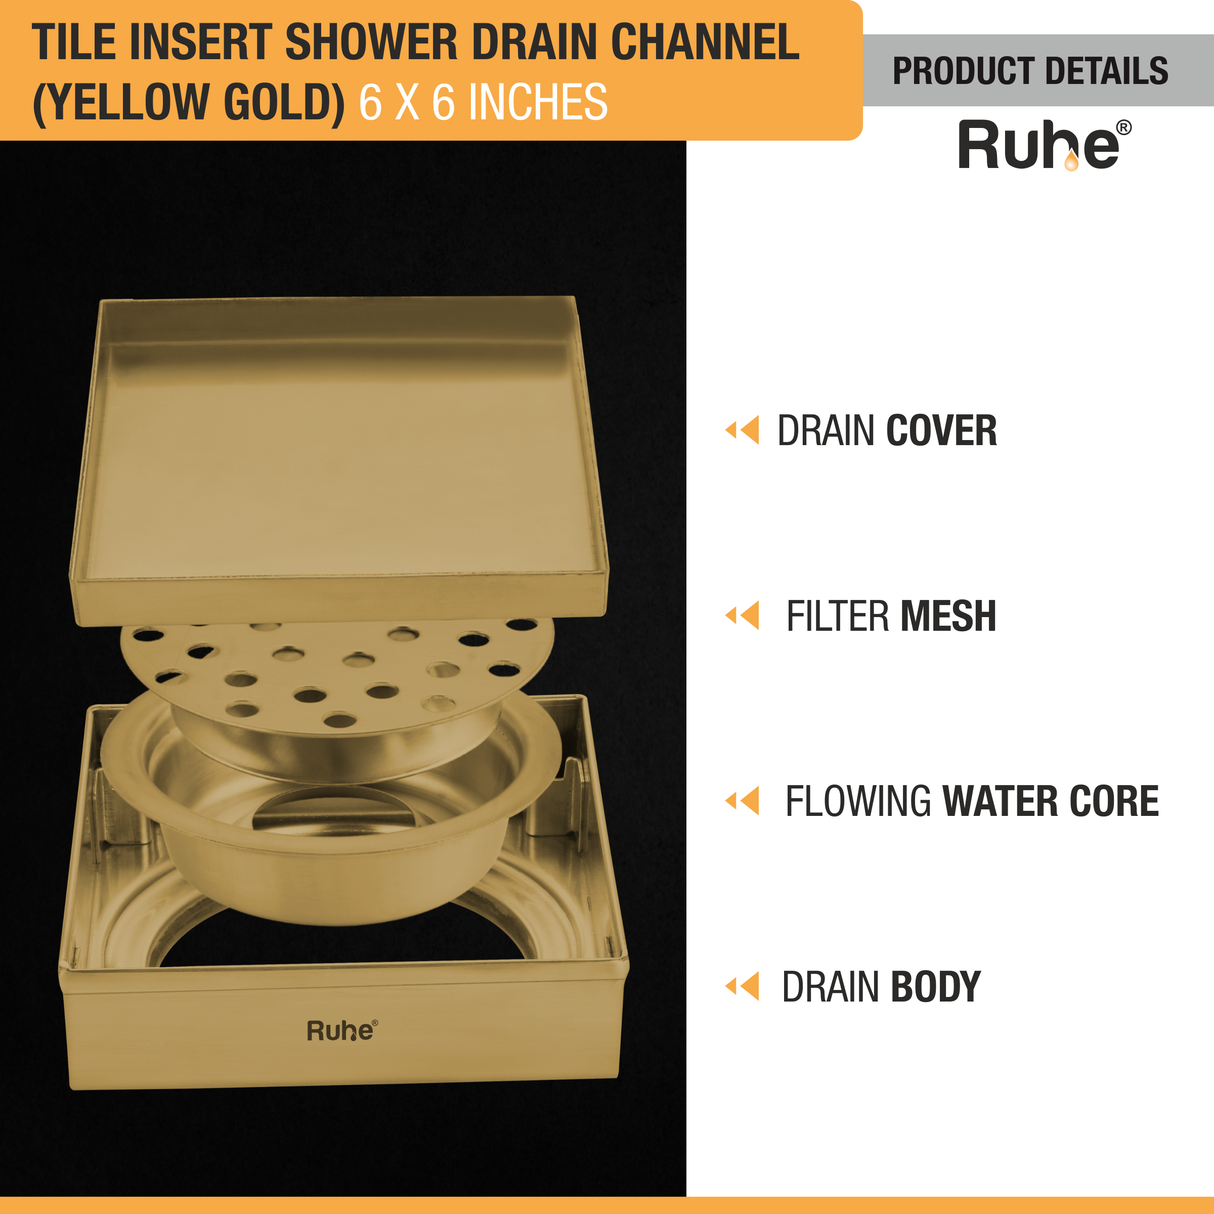 Tile Insert Shower Drain Channel (6 x 6 Inches) YELLOW GOLD product details